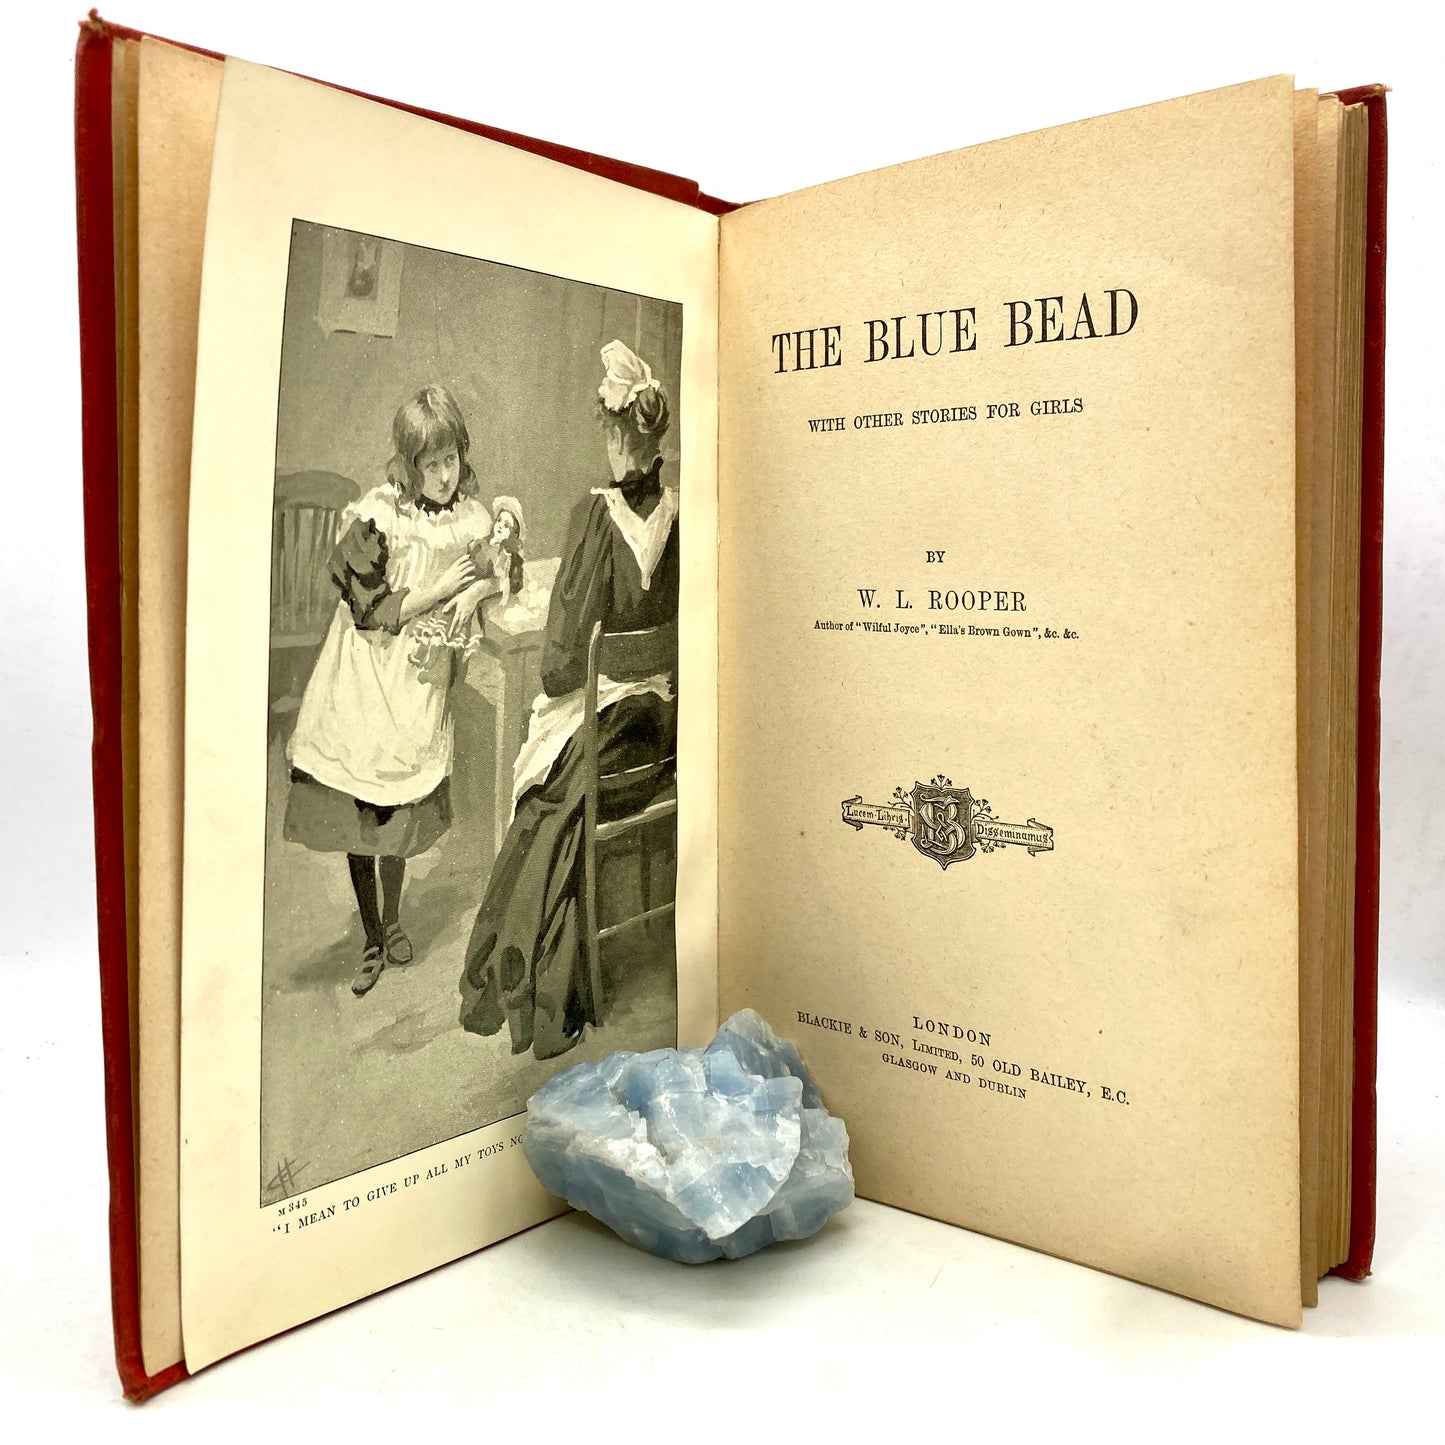 ROOPER, W.L. "The Blue Bead with Other Stories for Girls" [Blackie & Son, n.d./c1904]